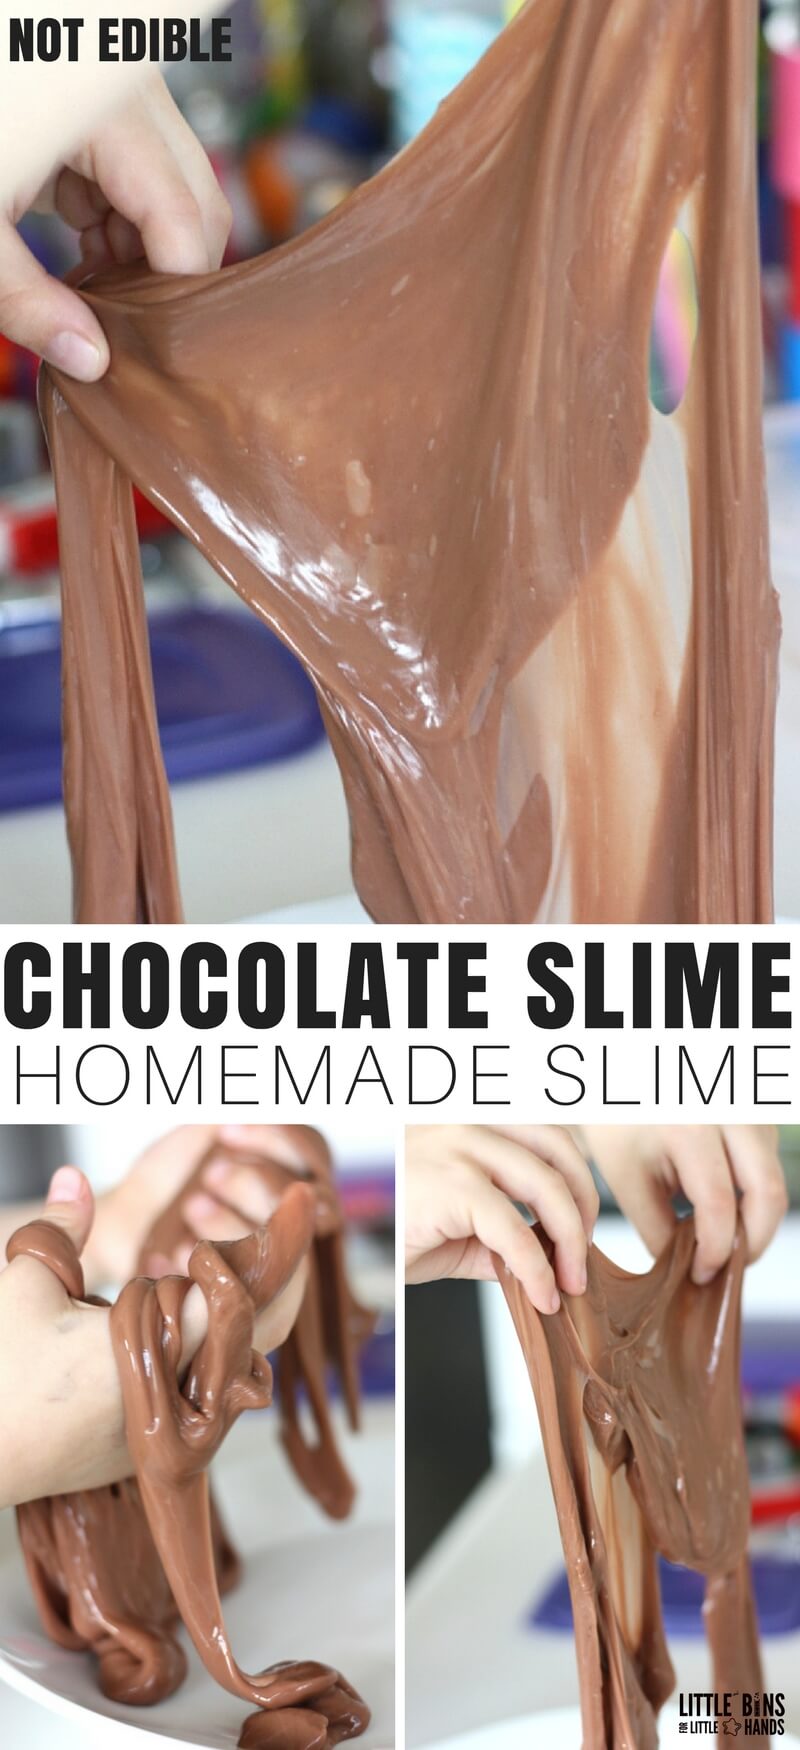 Learn how to make chocolate slime with kids using basic homemade slime recipes! Slime making is easy when you have great slime recipes to use. Hot chocolate slime is perfect for a winter slime theme. Slime making is also science and a great chemistry demonstrations. This chocolate theme slime is also great for scented sensory activities.